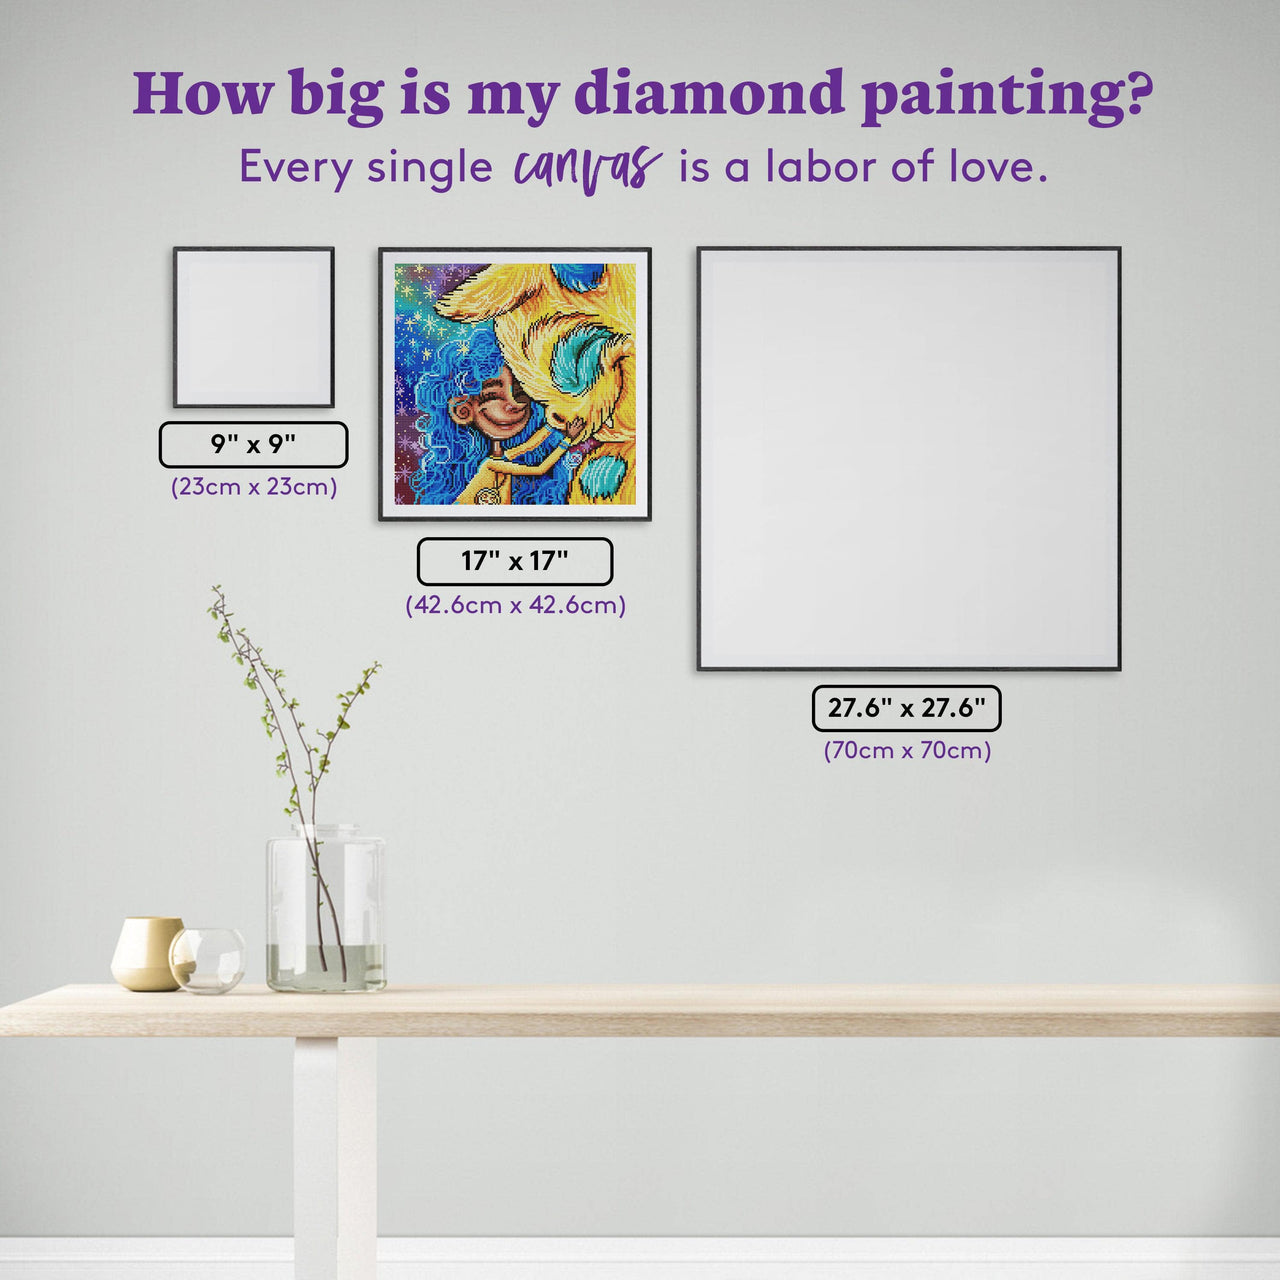 Diamond Painting Hugs for Hiccup 17" x 17" (42.6cm x 42.6cm) / Round With 34 Colors Including 3 ABs / 23,104